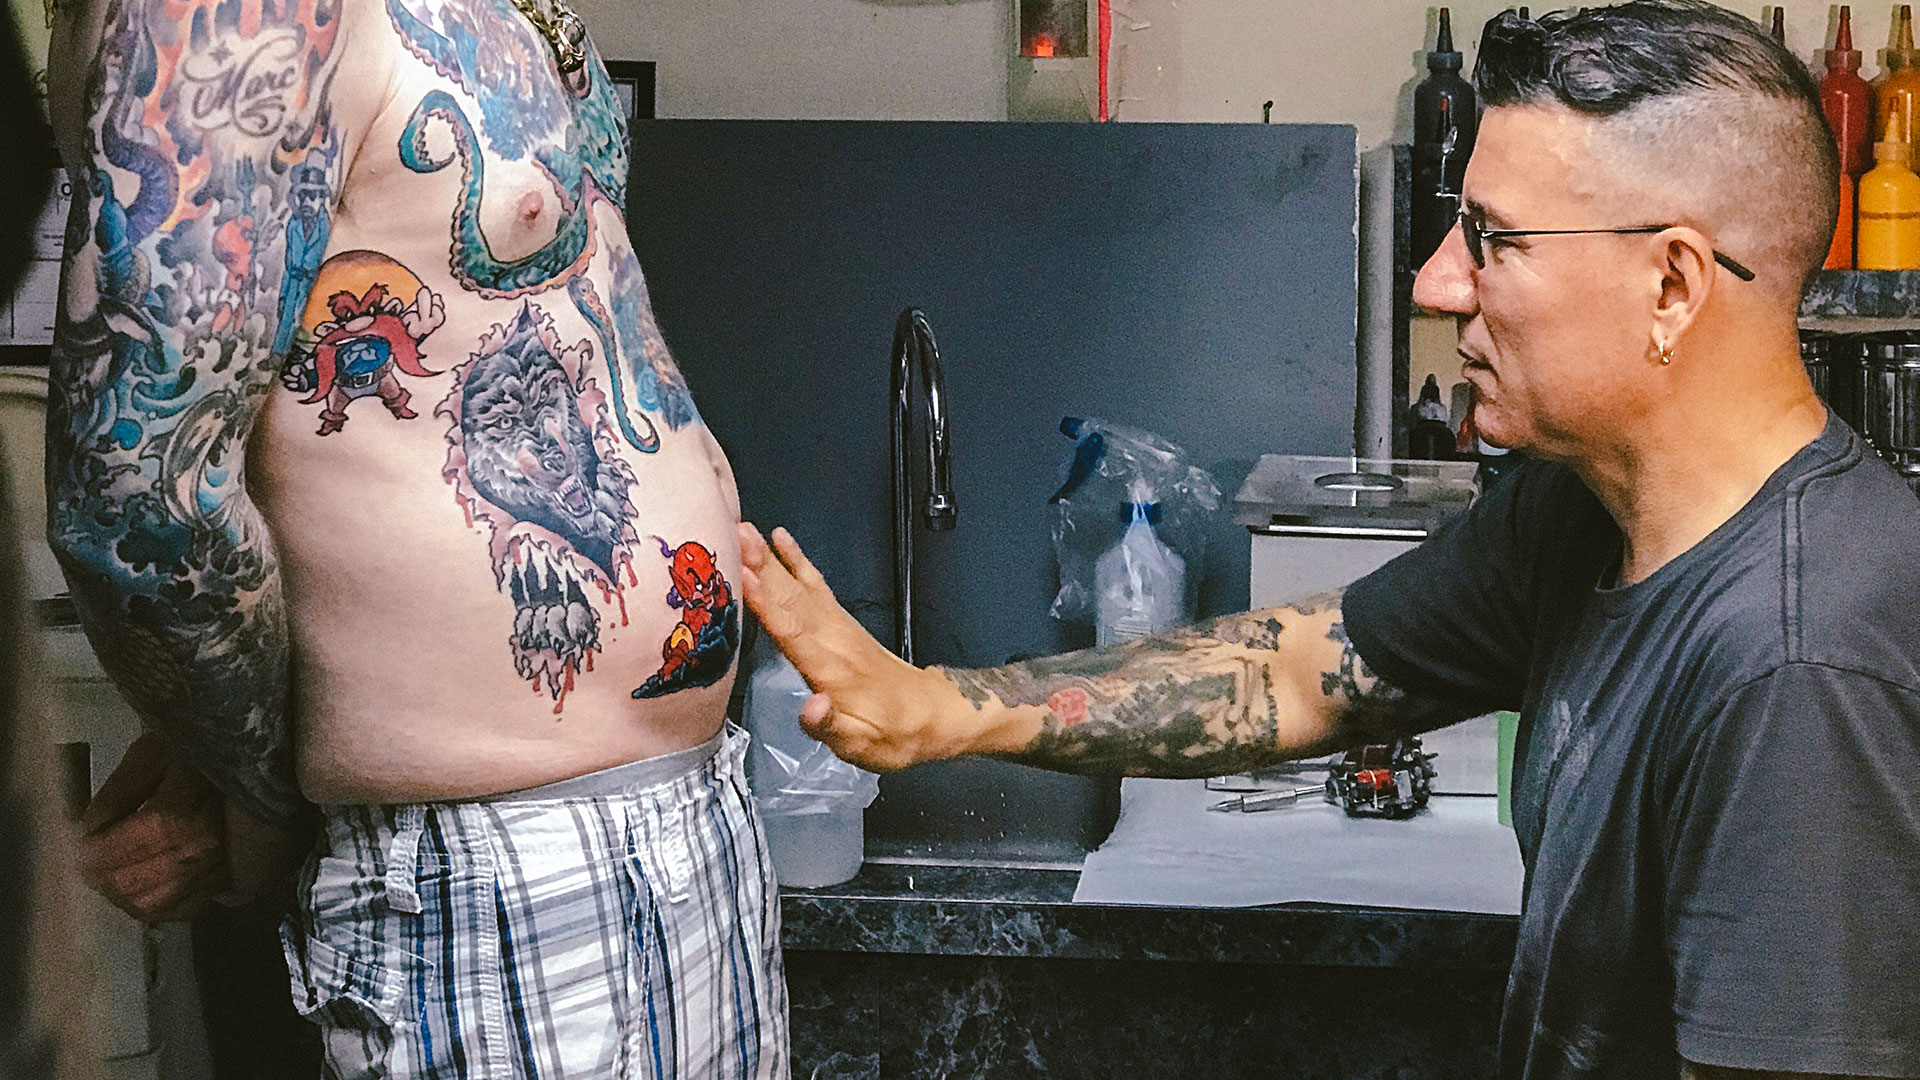 Brooklyn's Mike Perfetto: The Hardcore Scene's Tattoo King - VICE Video: Documentaries, Films, News Videos